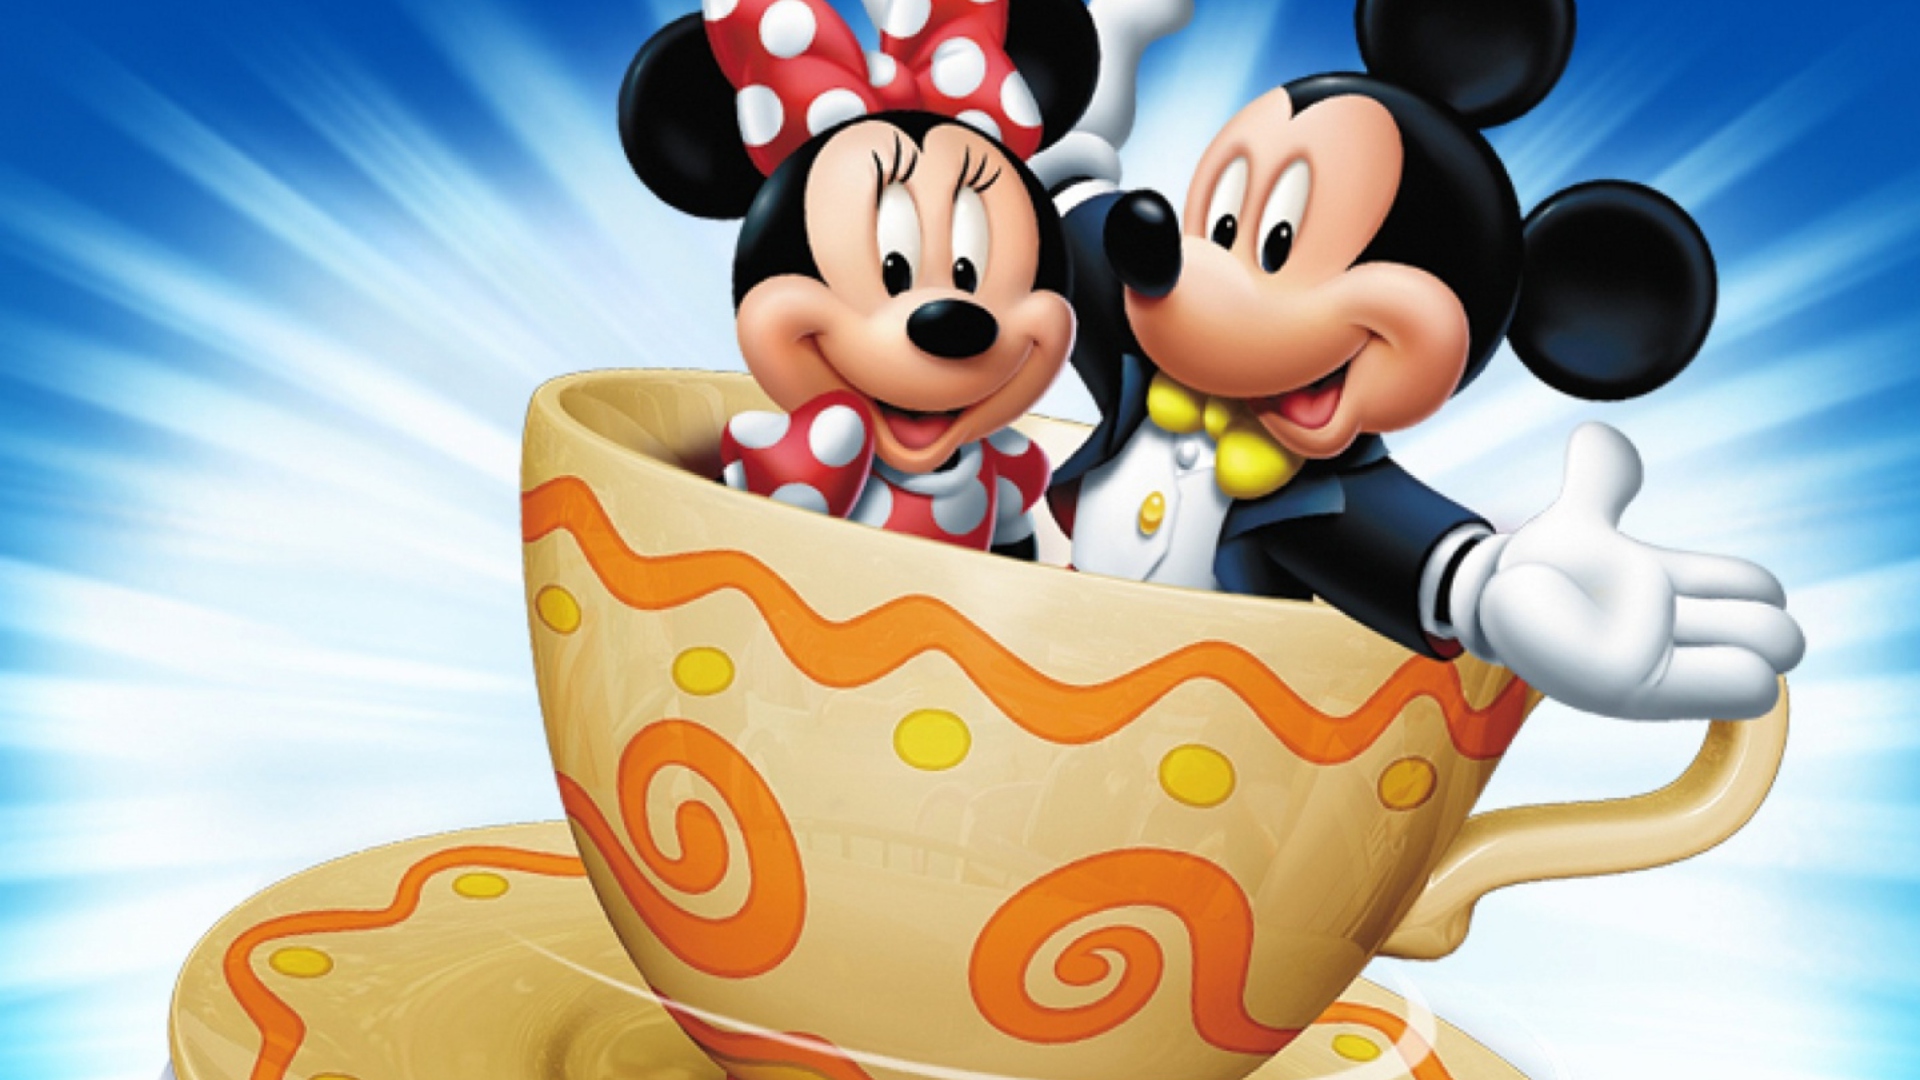 Das Mickey And Minnie Mouse In Cup Wallpaper 1920x1080